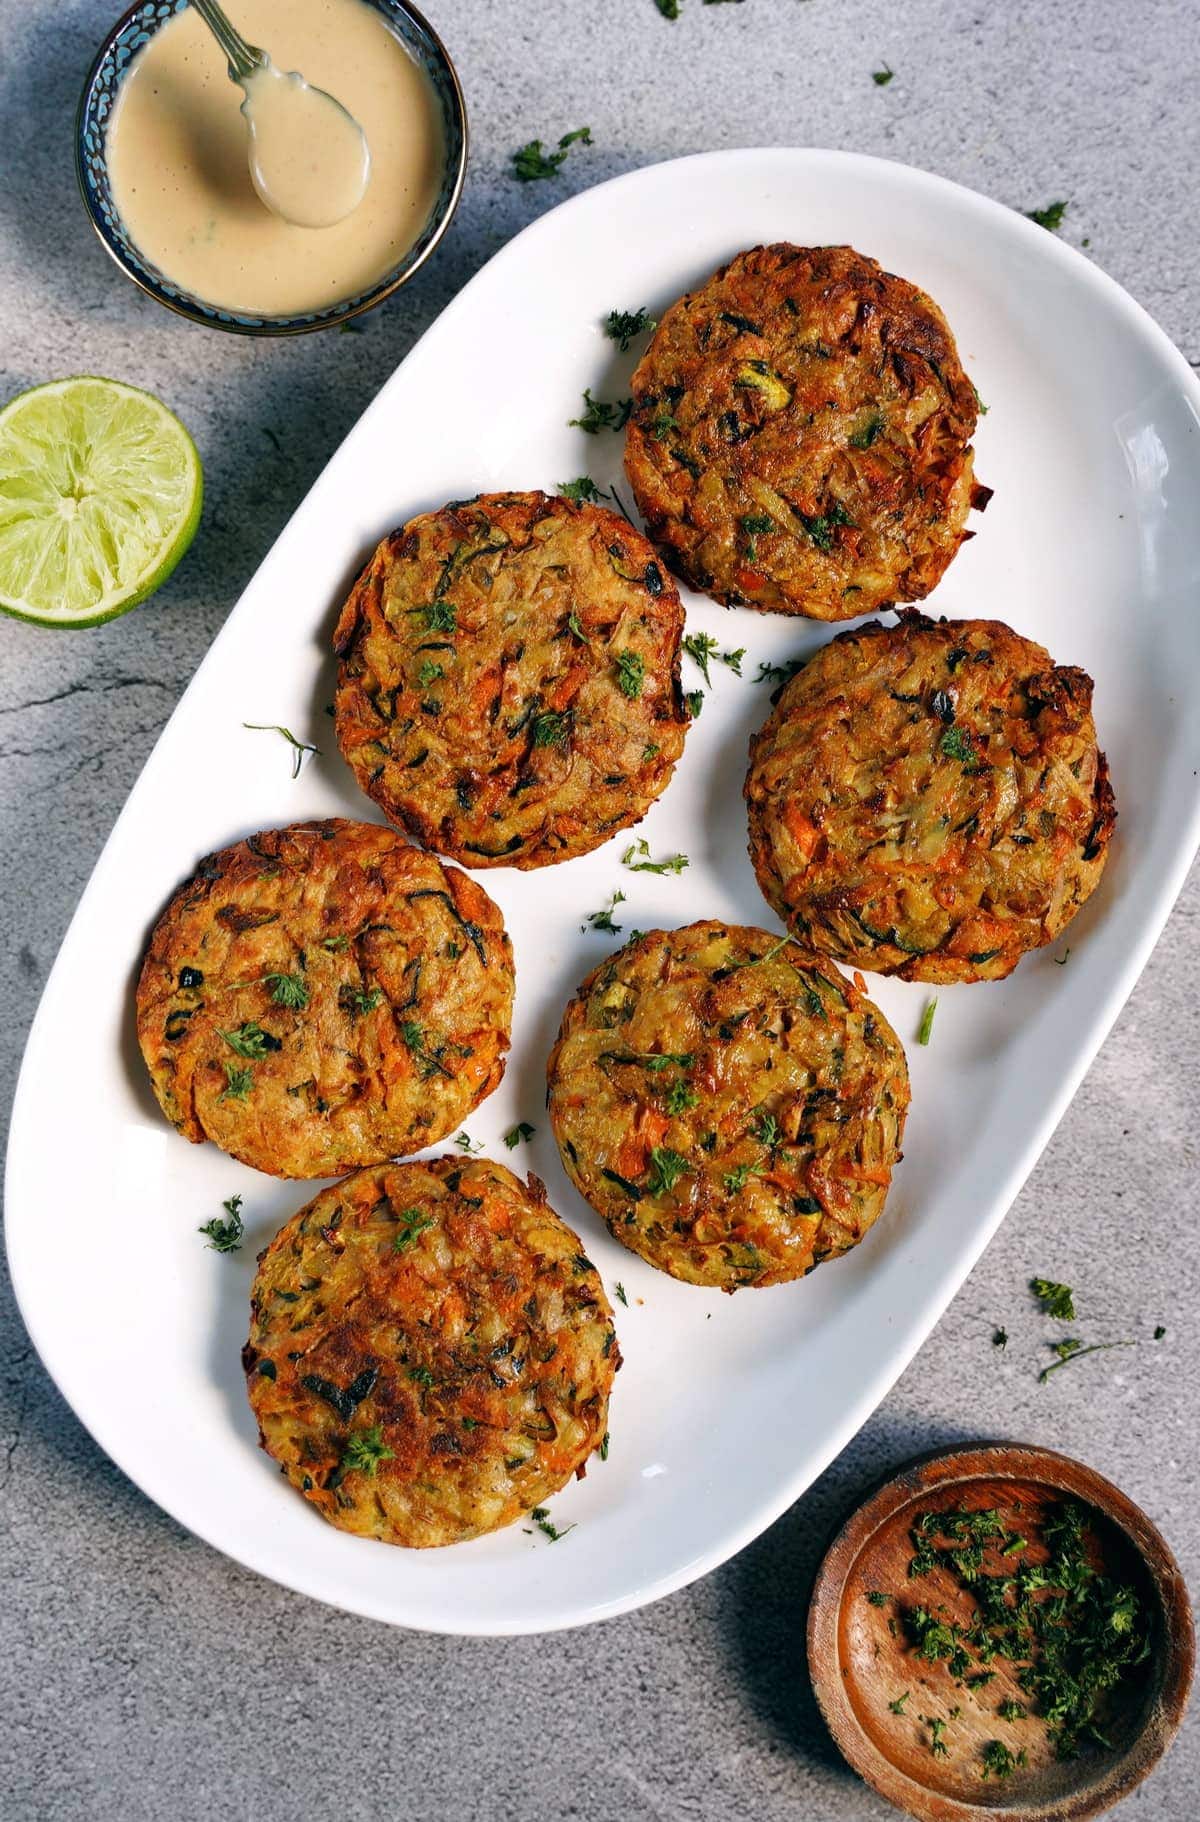 6 vegetable fritters on white plate from above